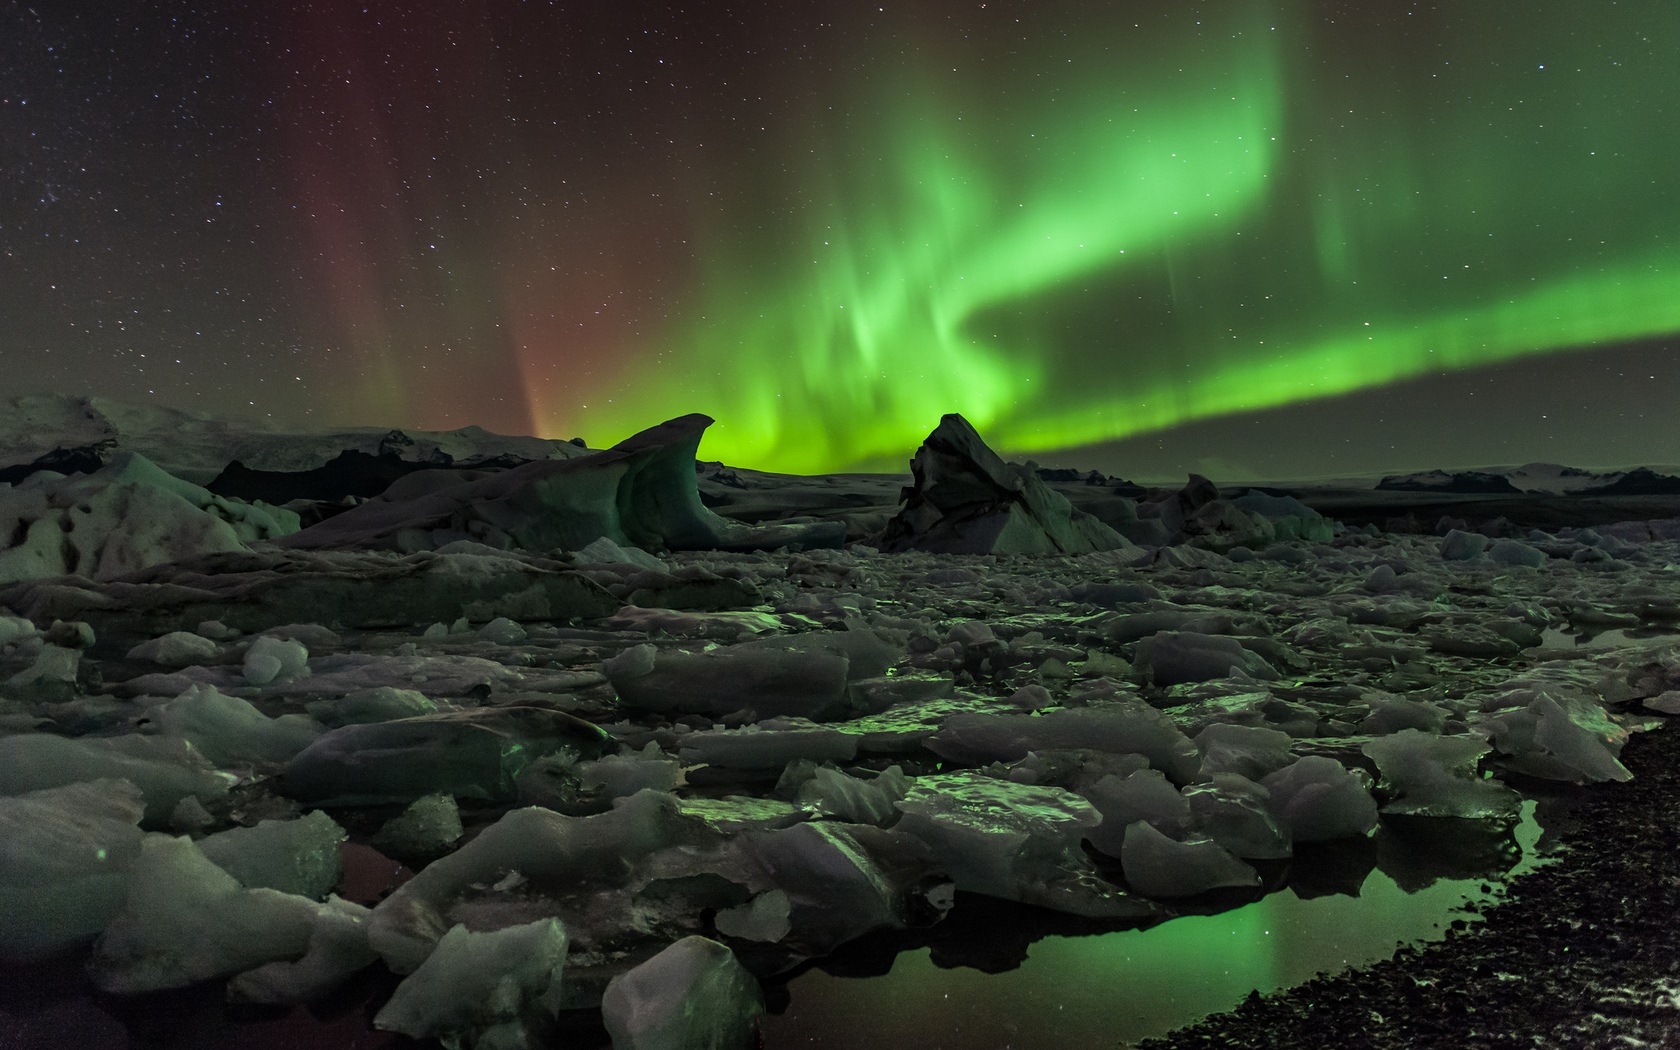 Natural wonders of the Northern Lights HD Wallpaper (1) #17 - 1680x1050